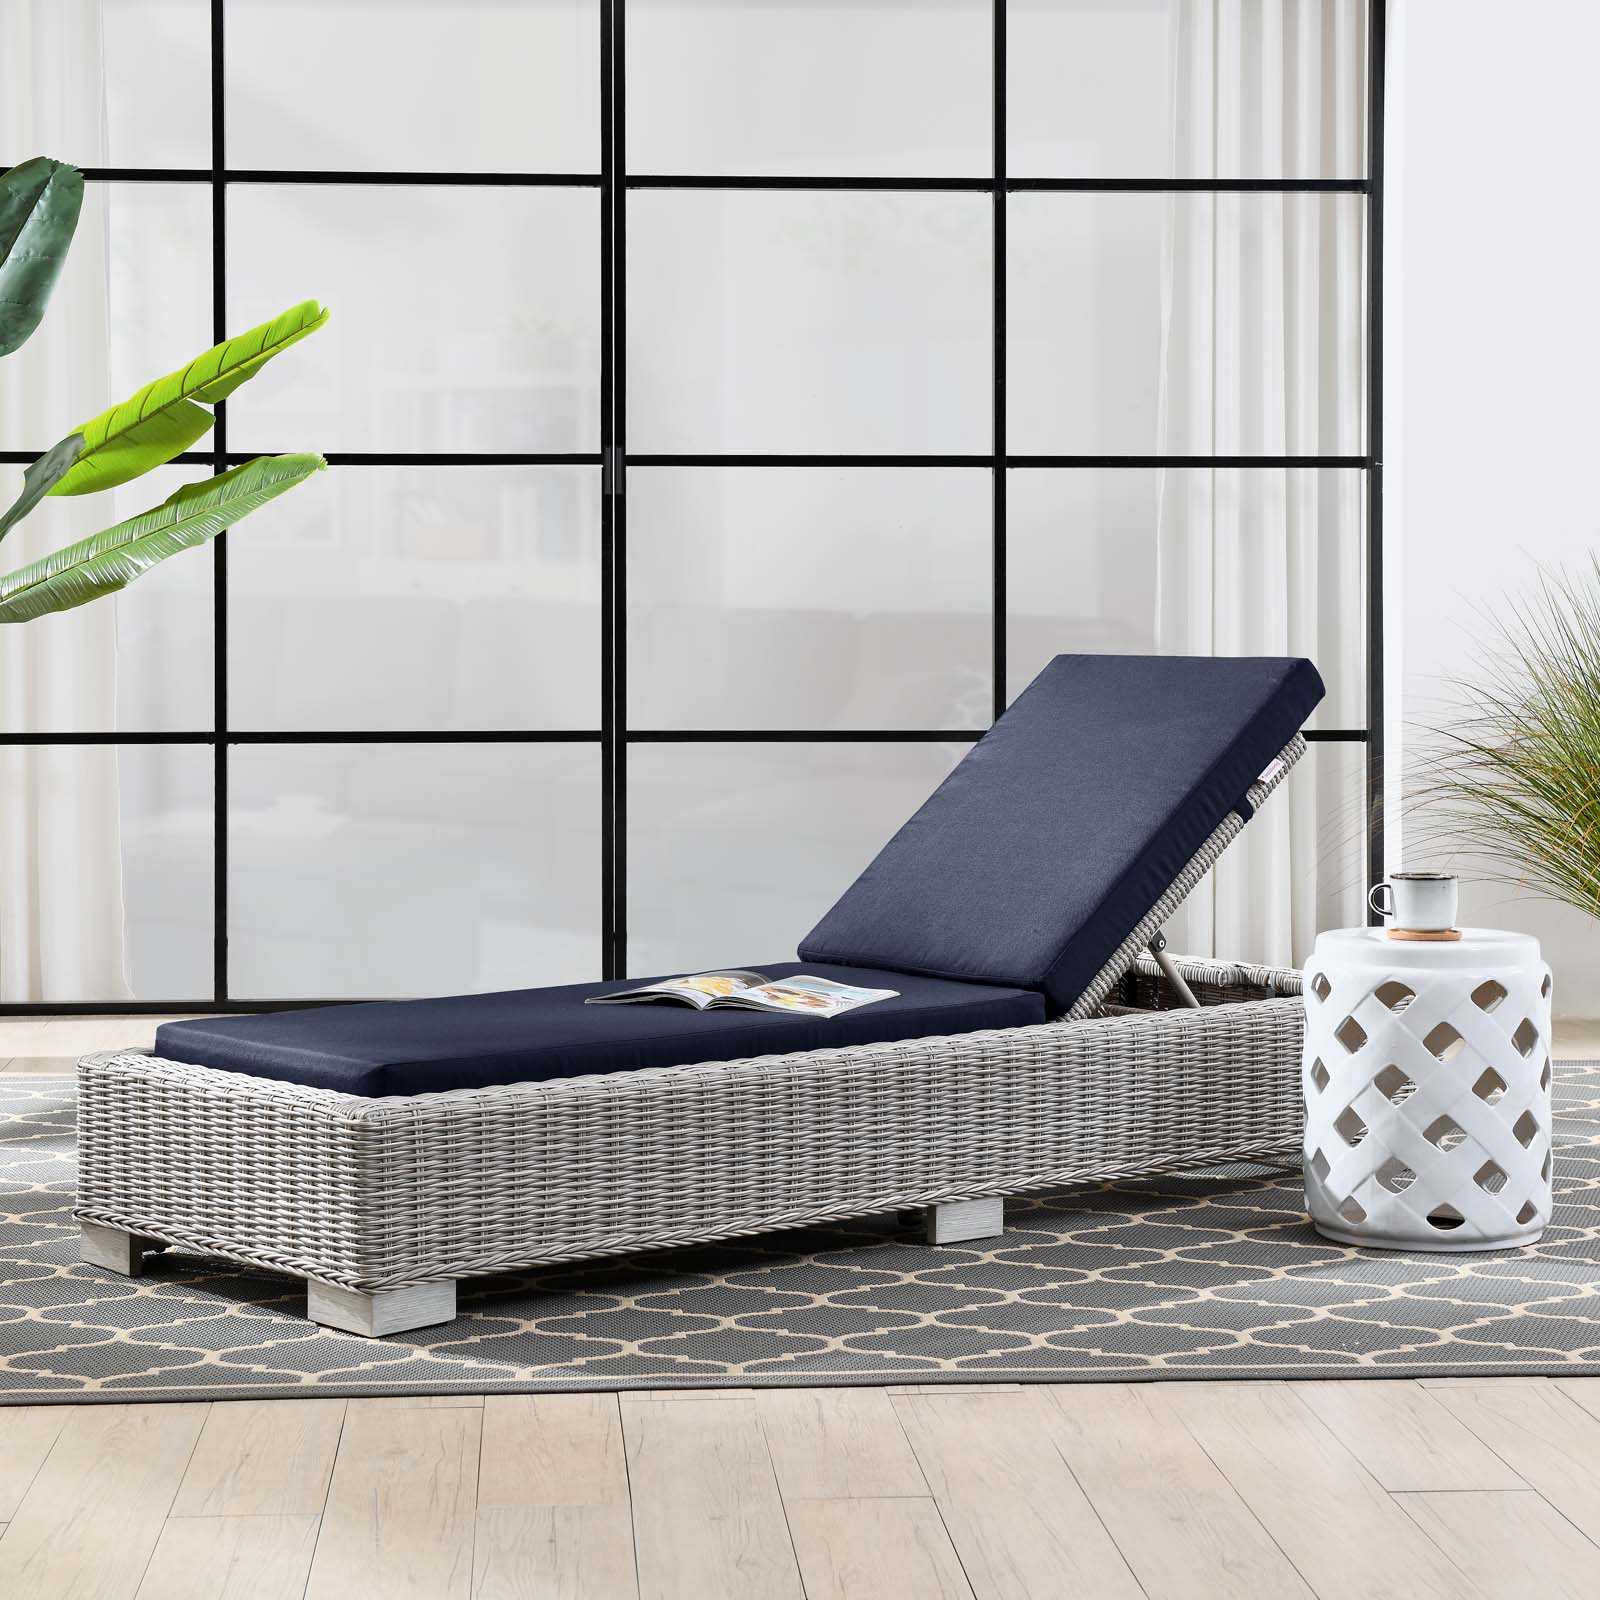 Modway Conway Outdoor Patio Wicker Rattan Chaise Lounge in Light Gray Navy - image 1 of 9